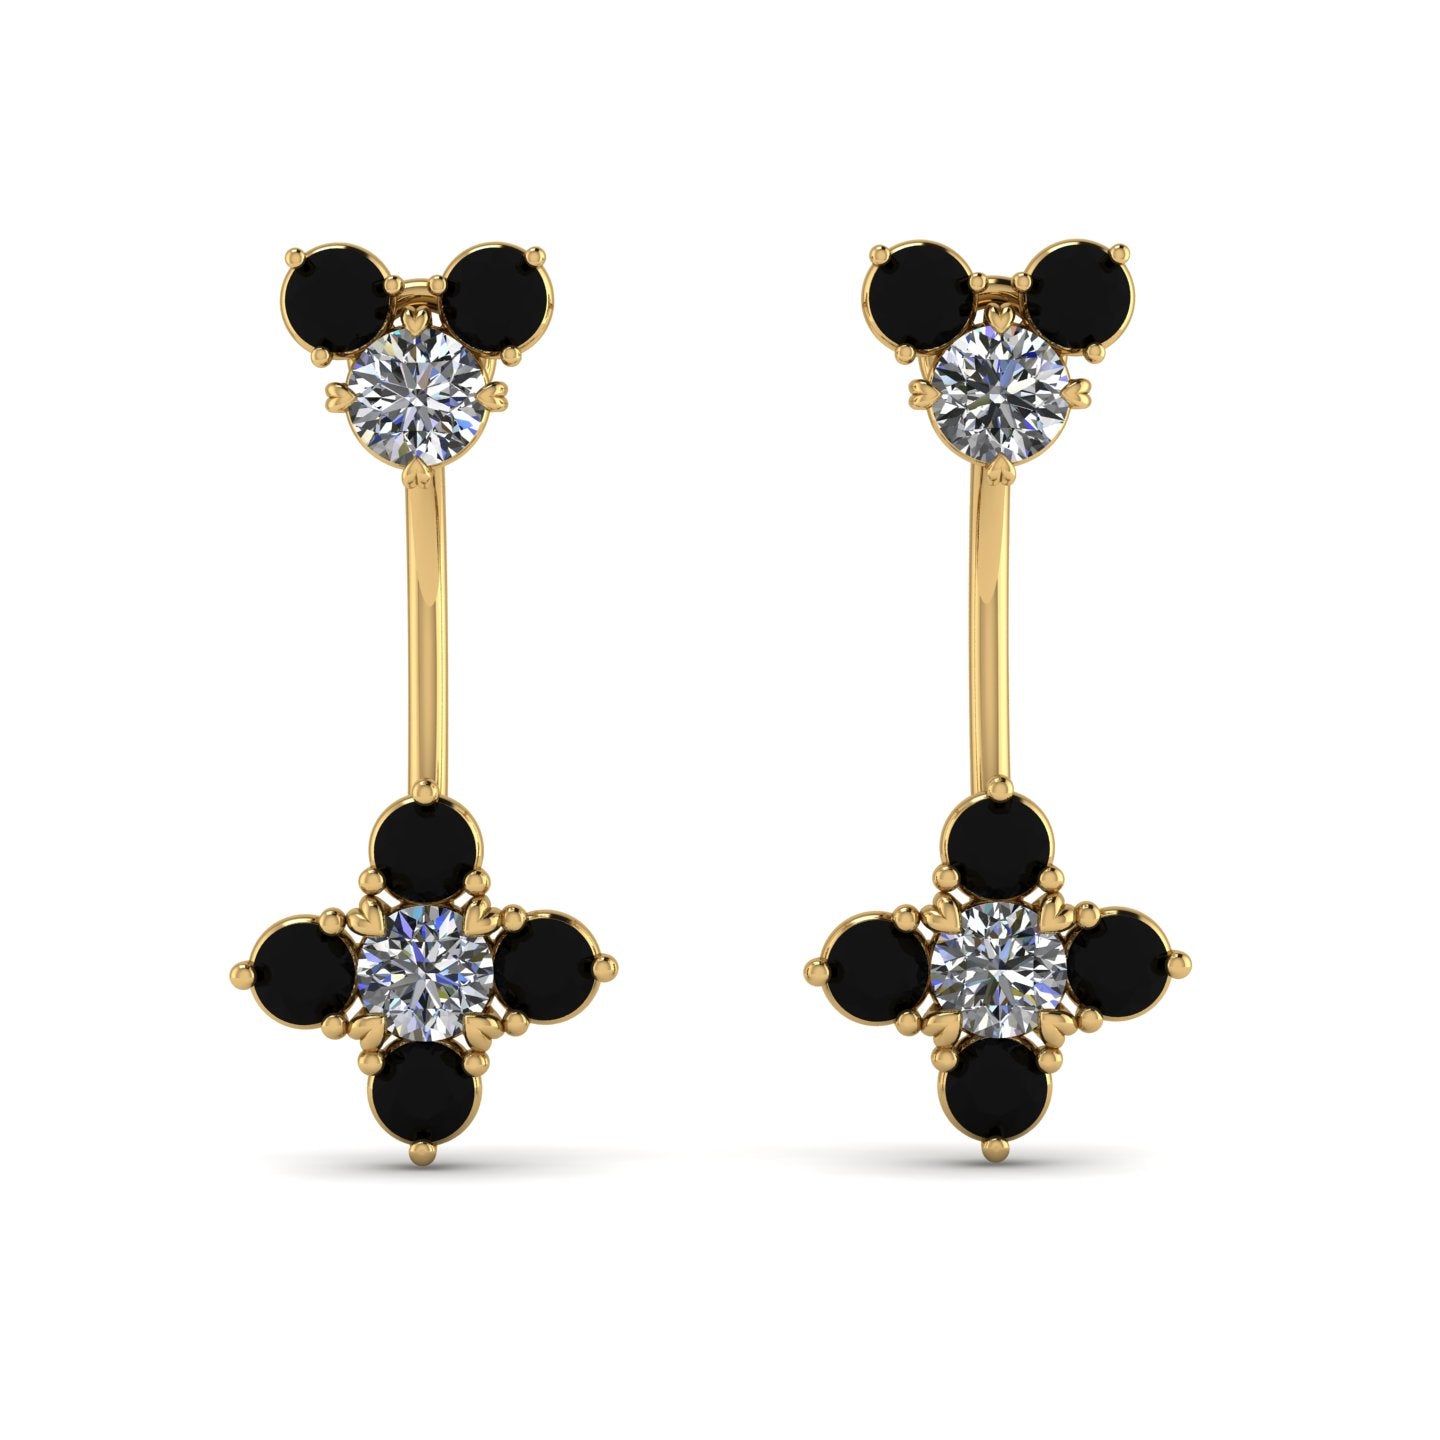 Ever Blossom Earrings, Yellow Gold, Onyx & Diamonds - Jewelry